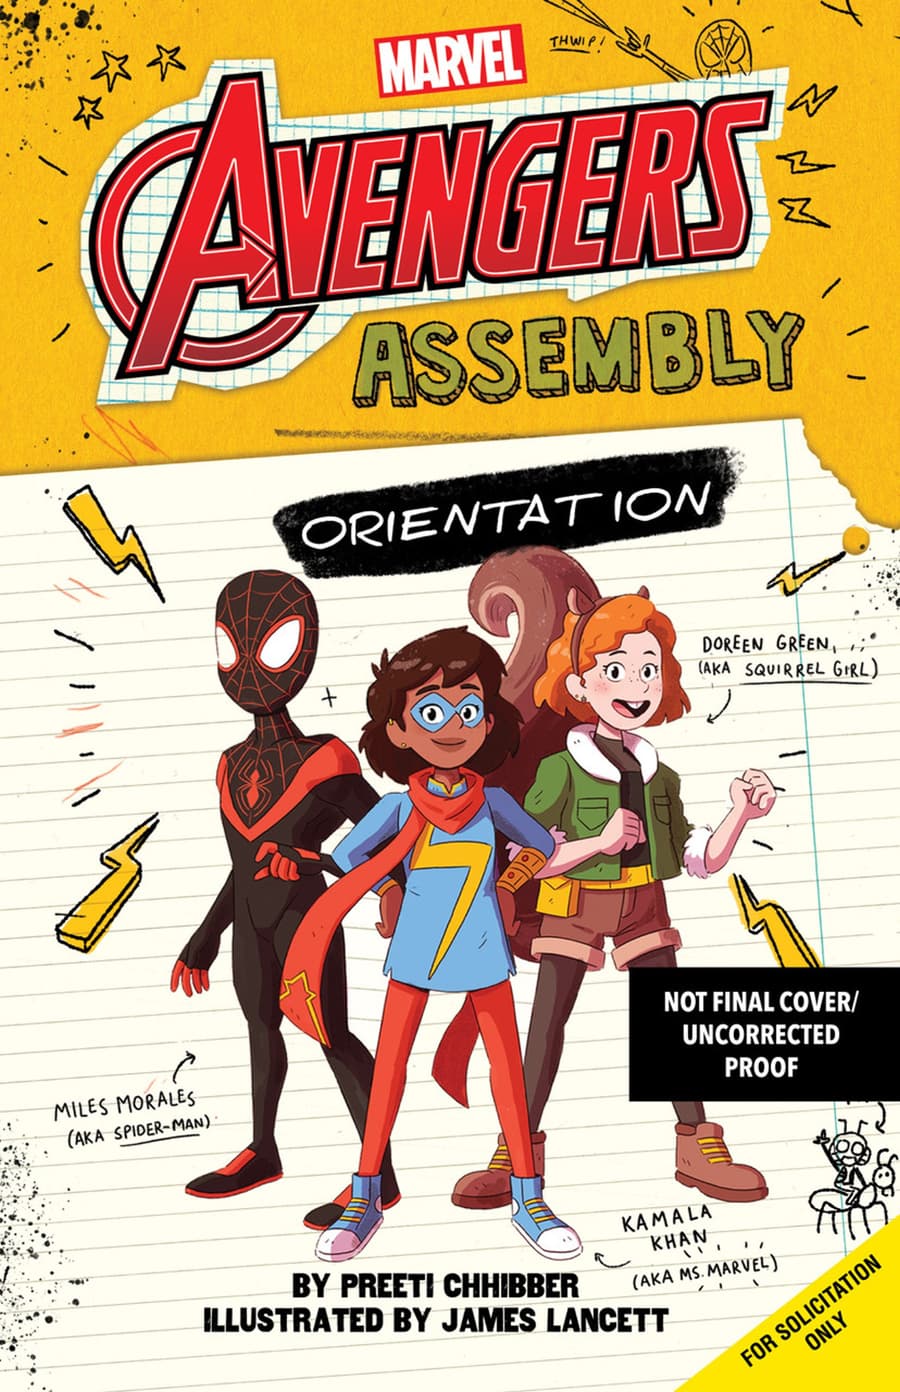 Avengers Assembly: Orientation cover by James Lancett